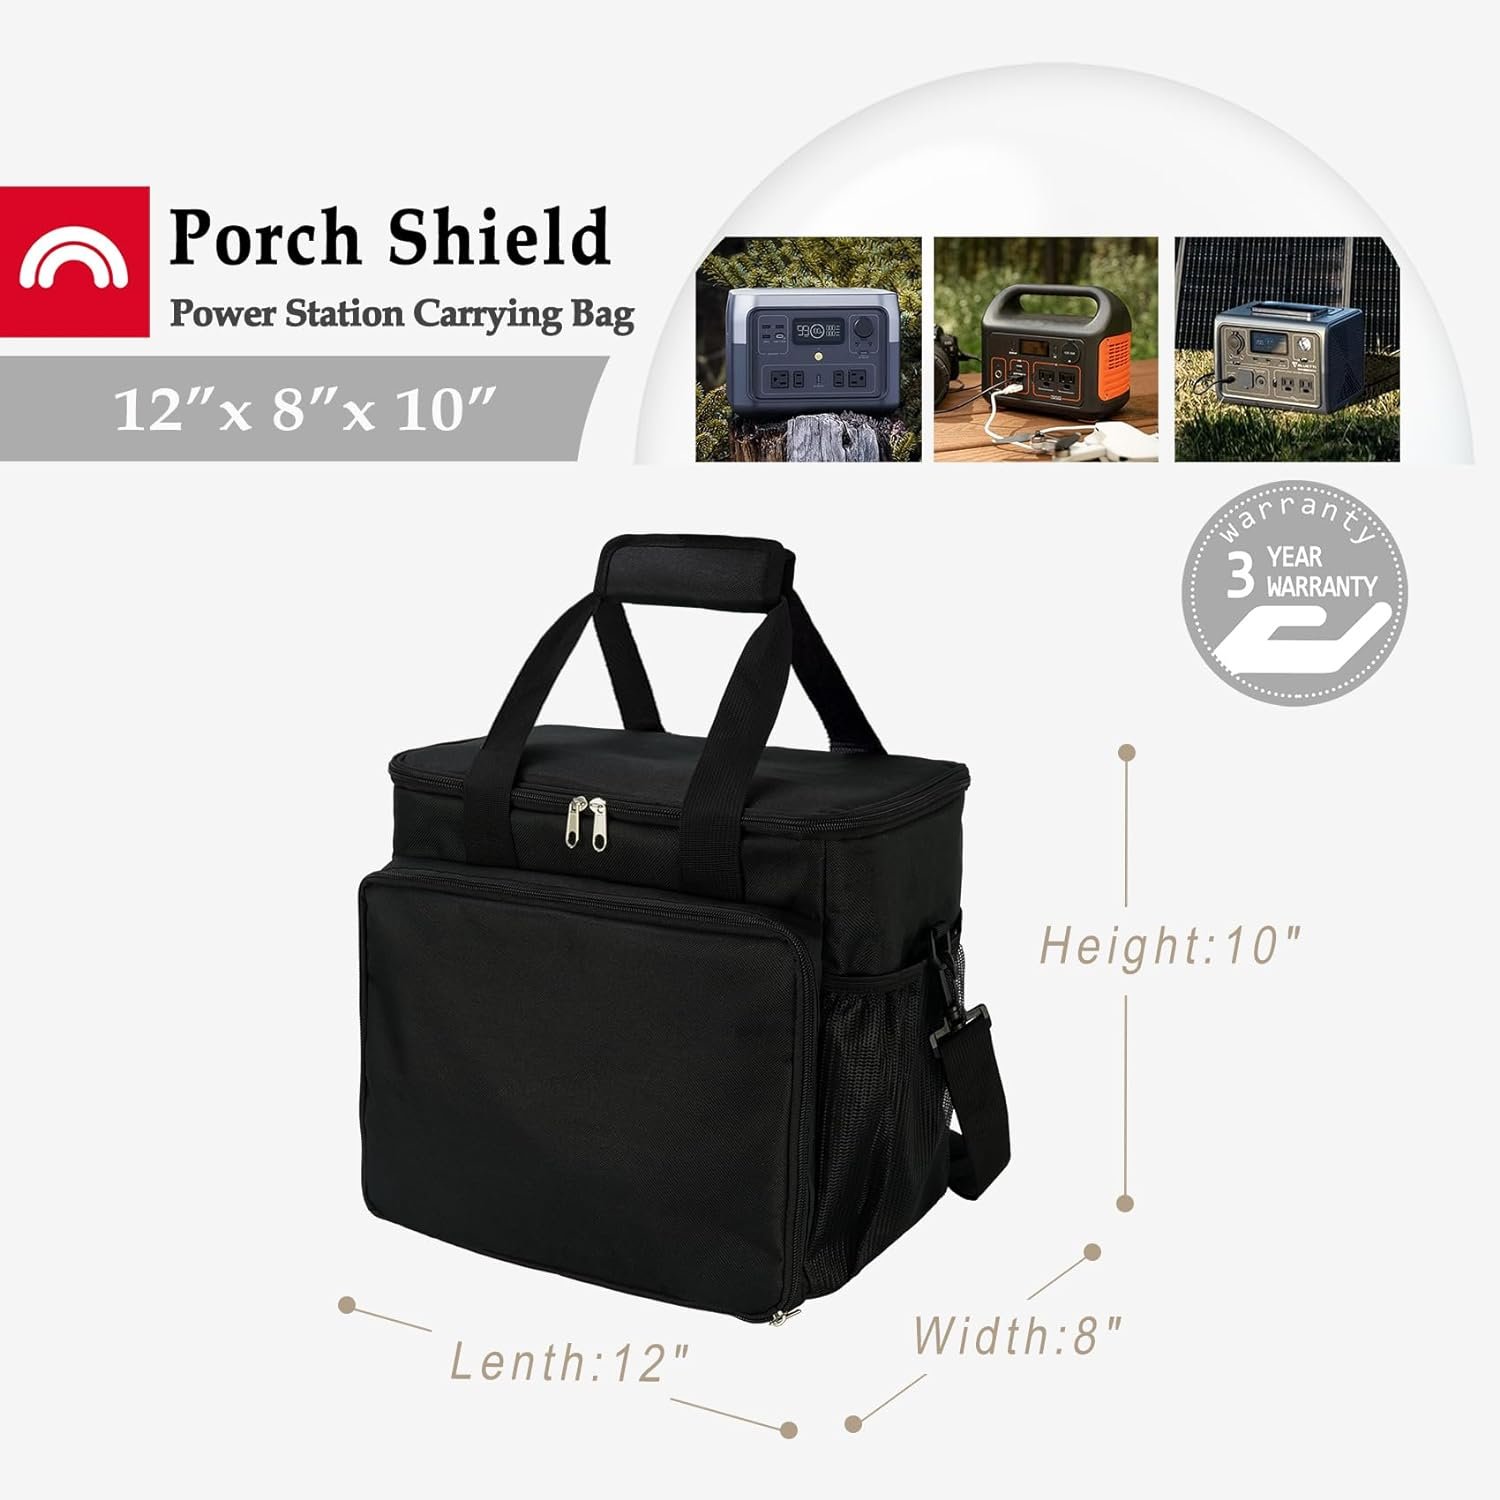 Porch Shield Portable Power Station Carrying Storage Bag for Jackery Solar Generator Explorer 500 Review